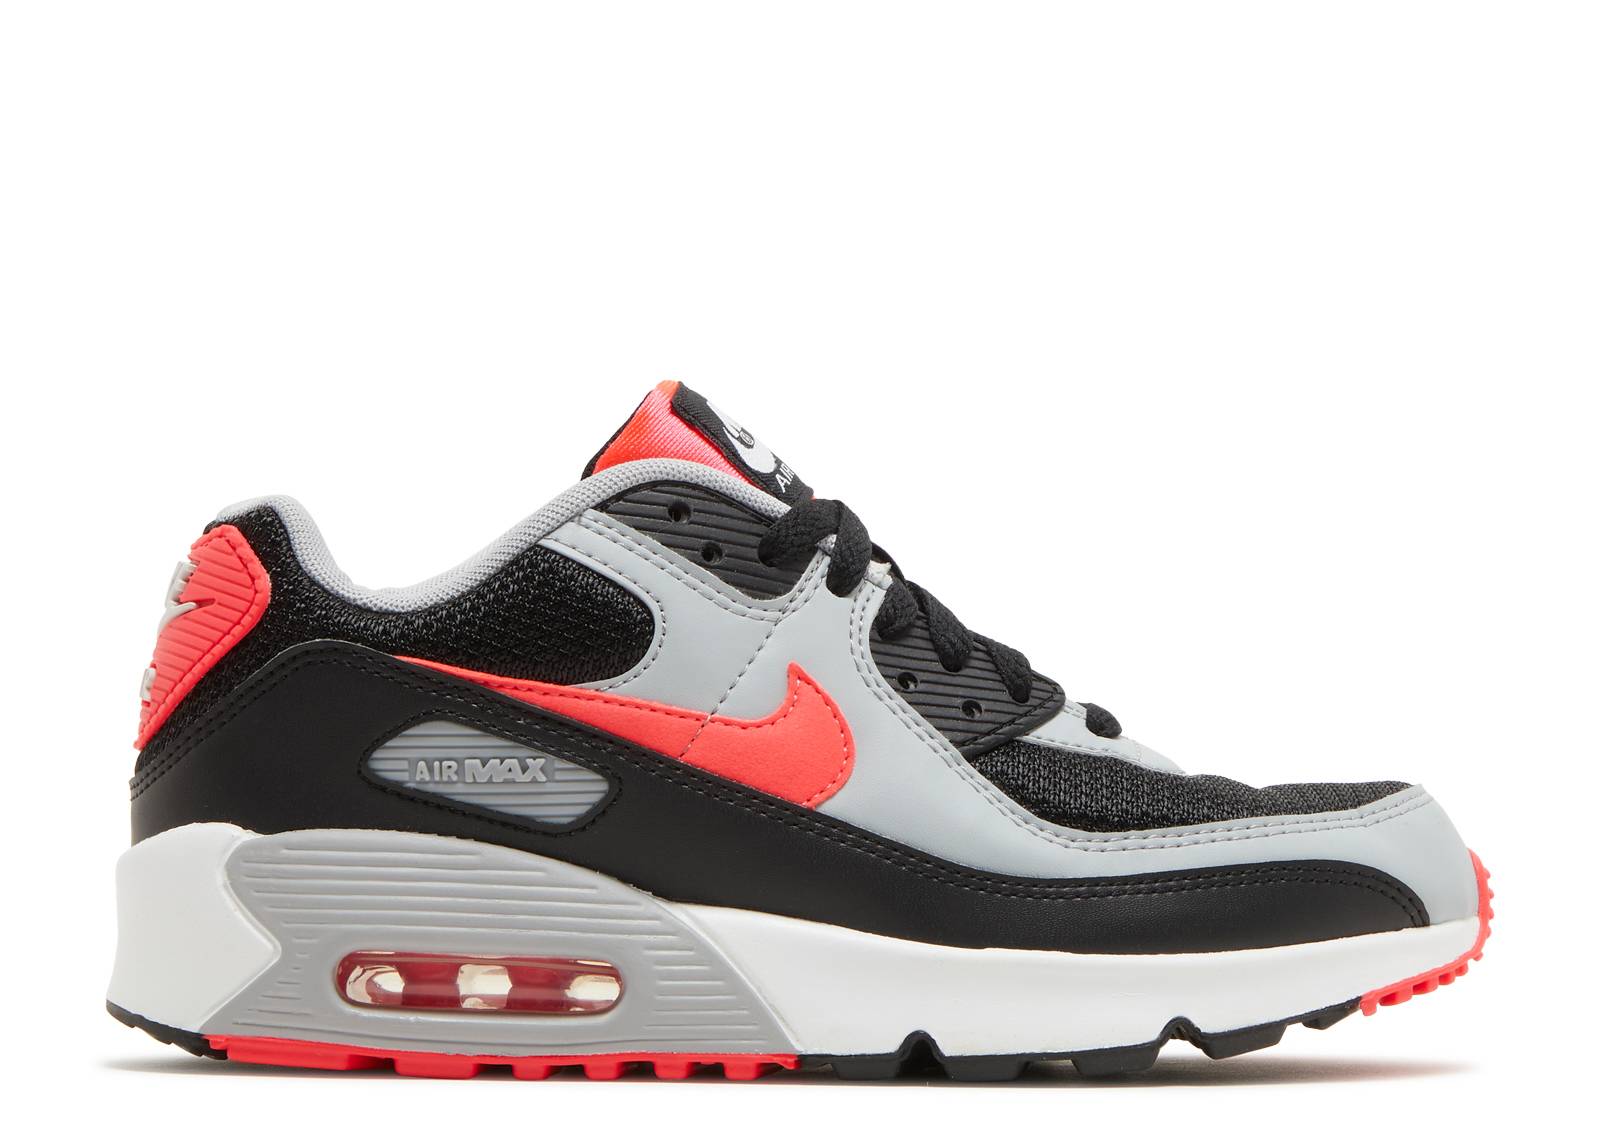 Air Max 90 LTR GS 'Radiant Red'